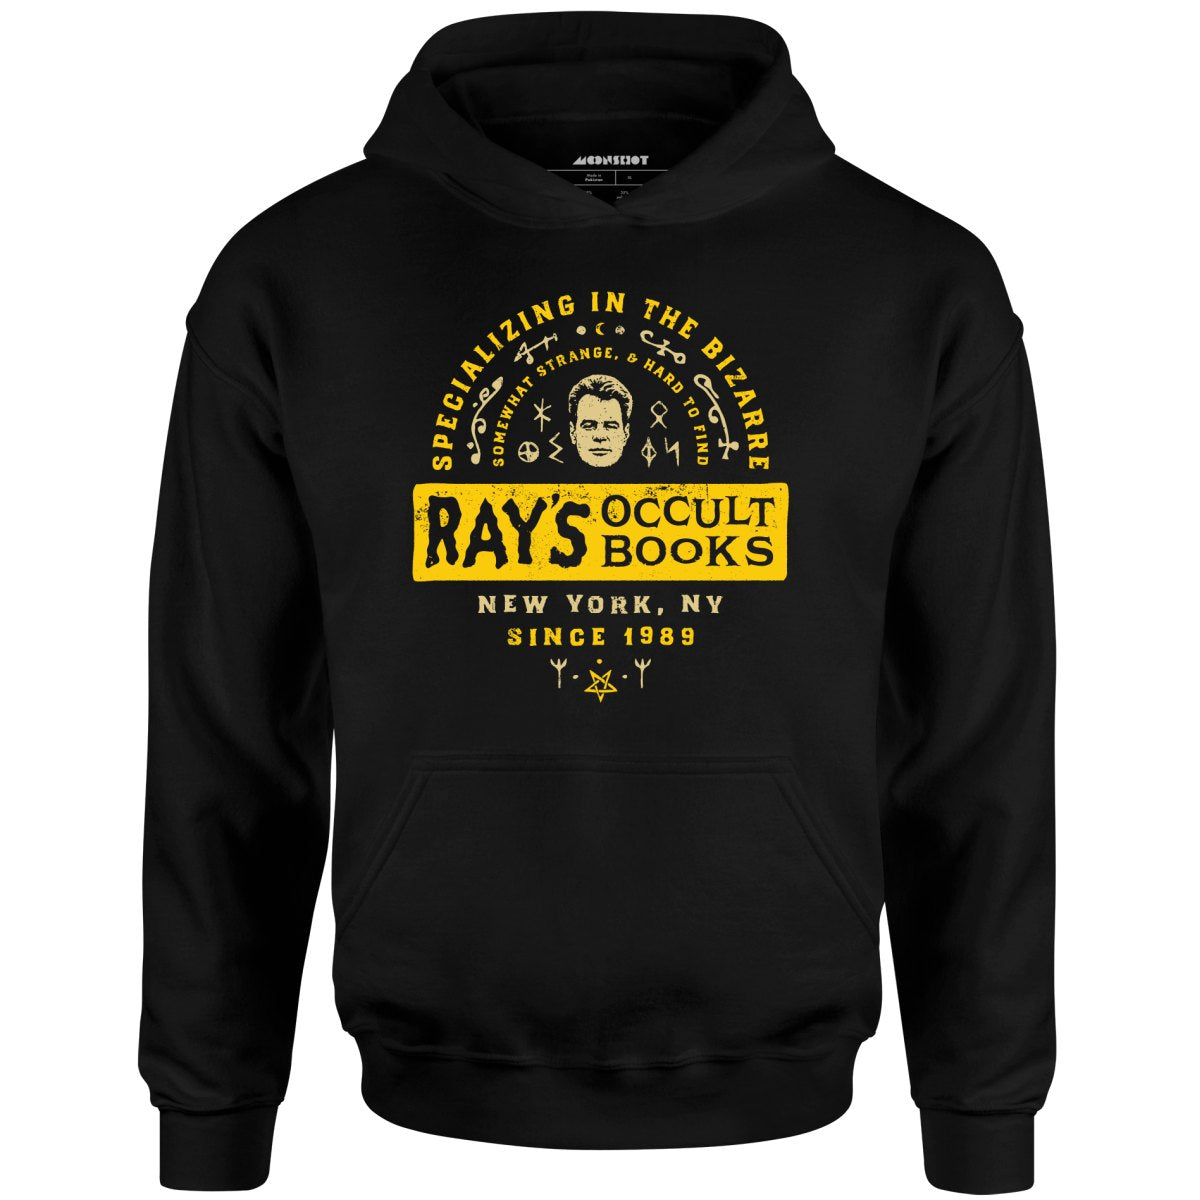 Ray's Occult Books - Unisex Hoodie